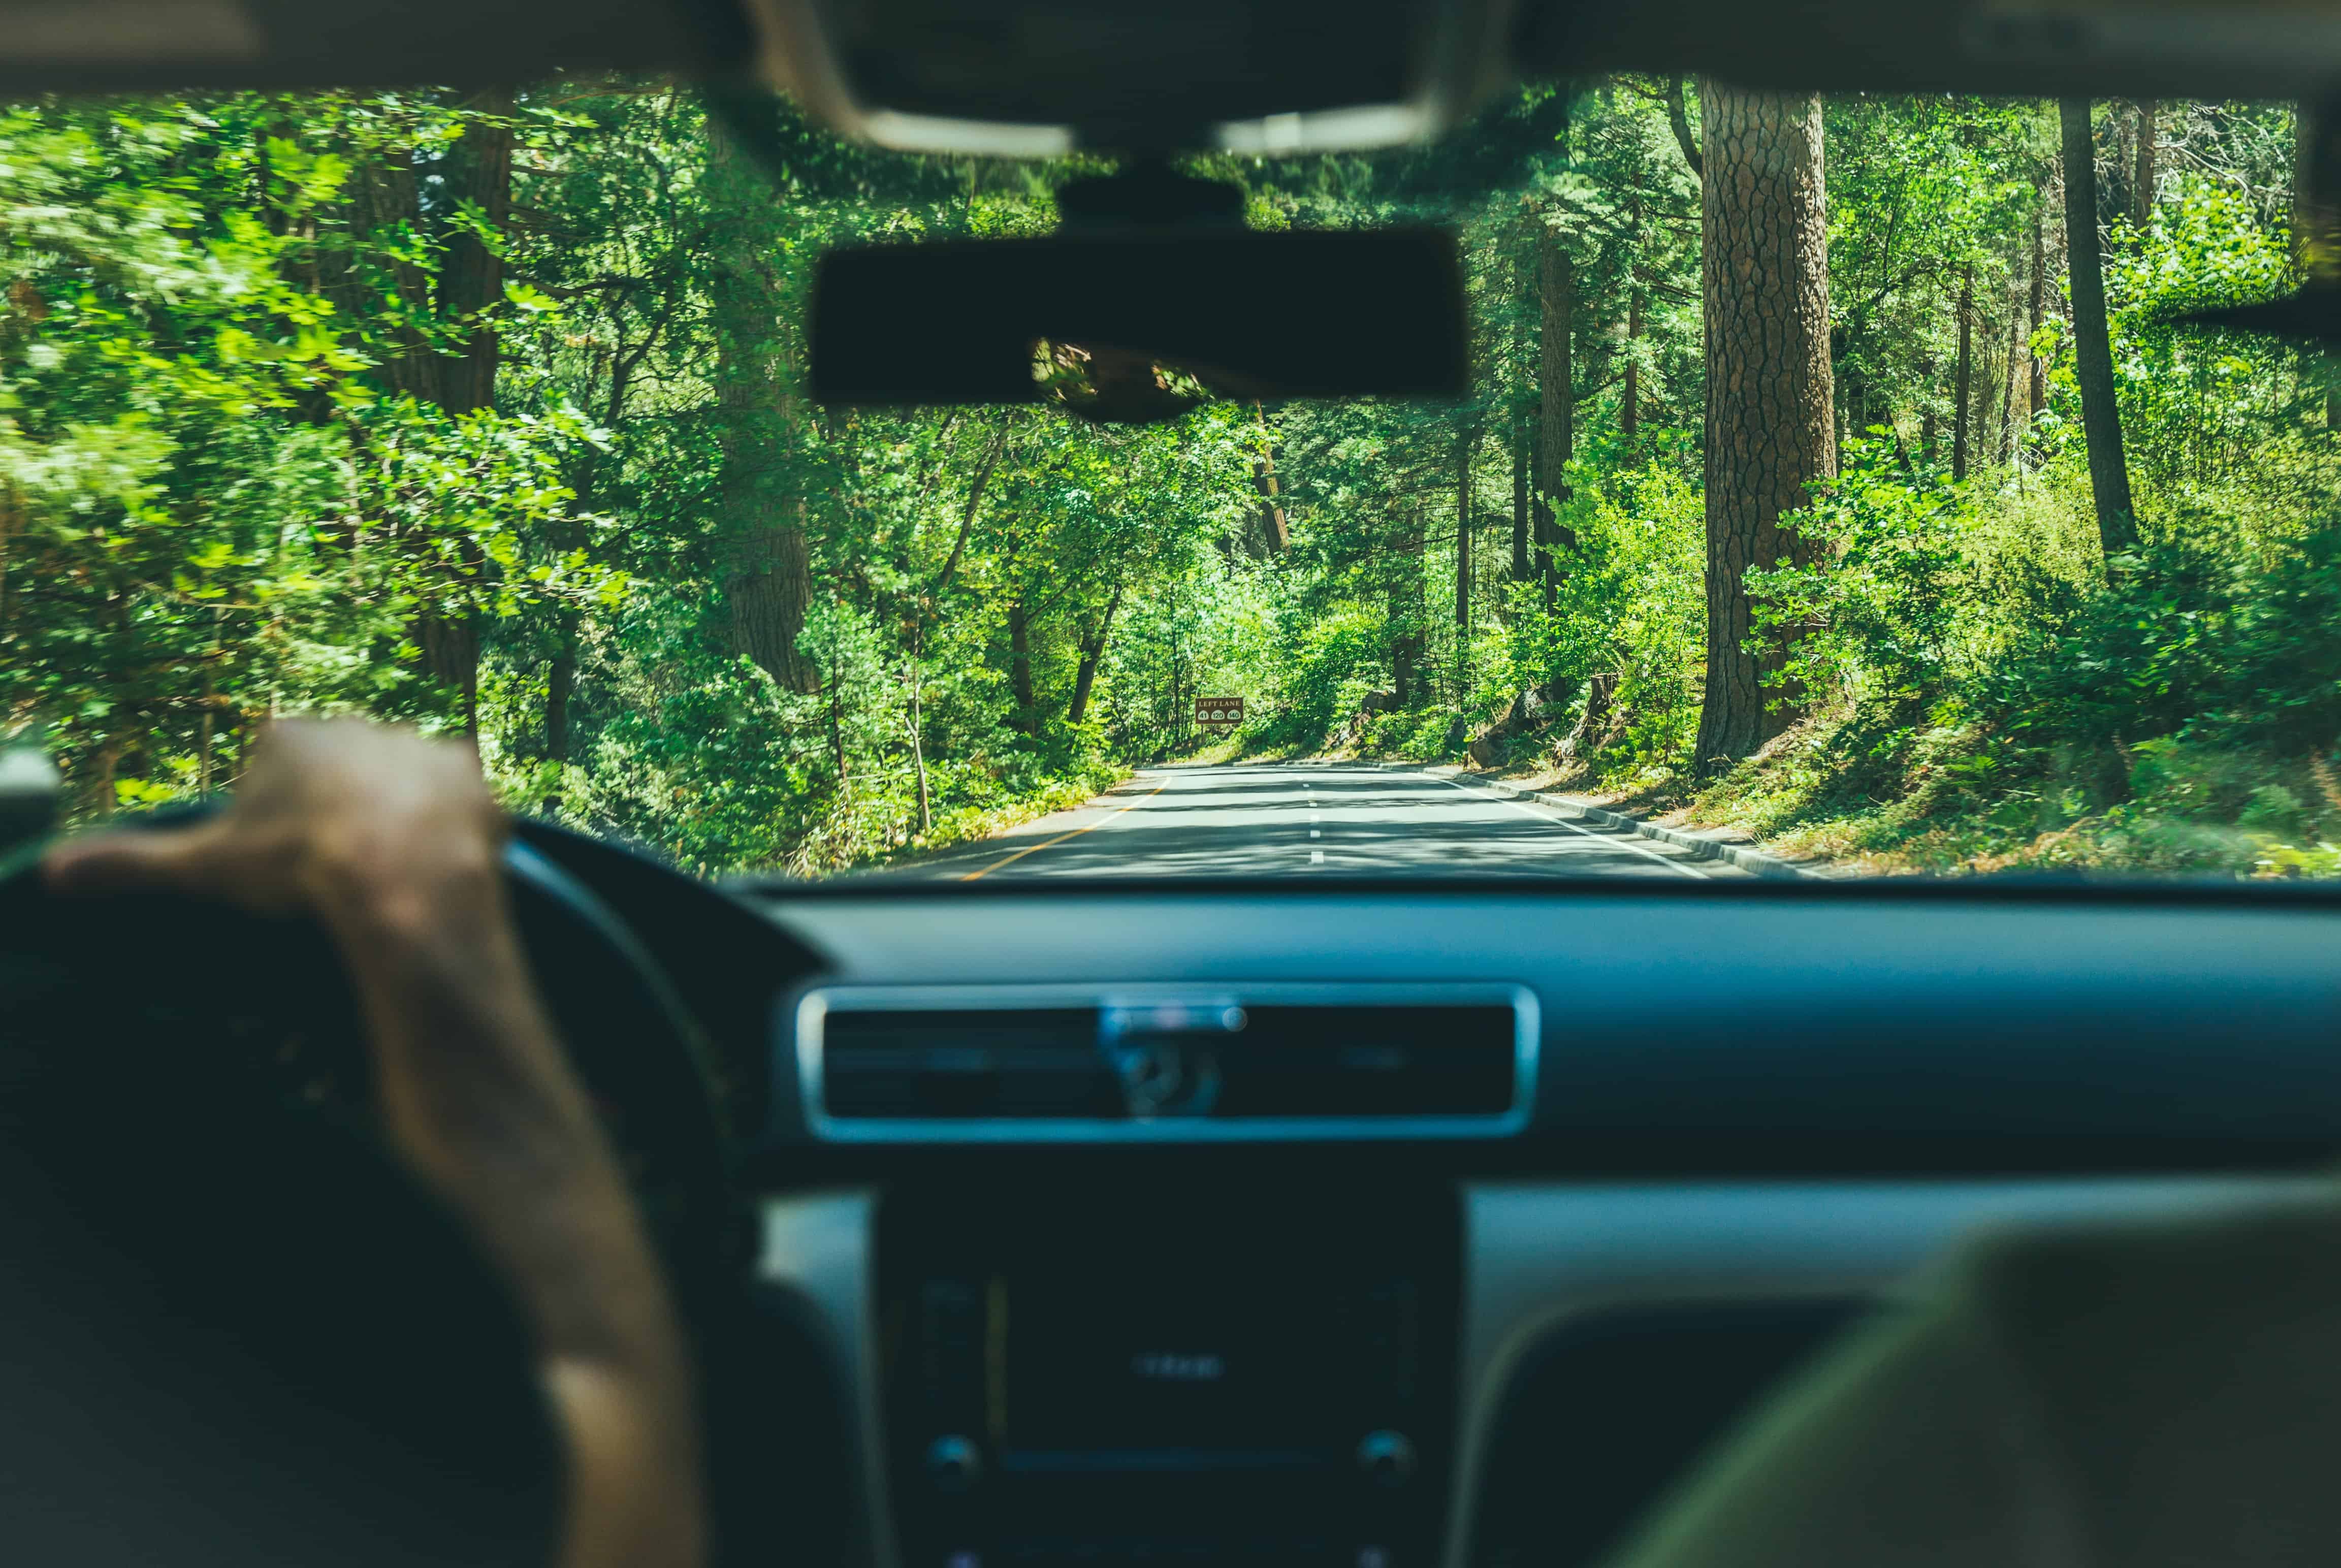 View of a tree filled road from the windshield of a car with a hand on the steering wheel.